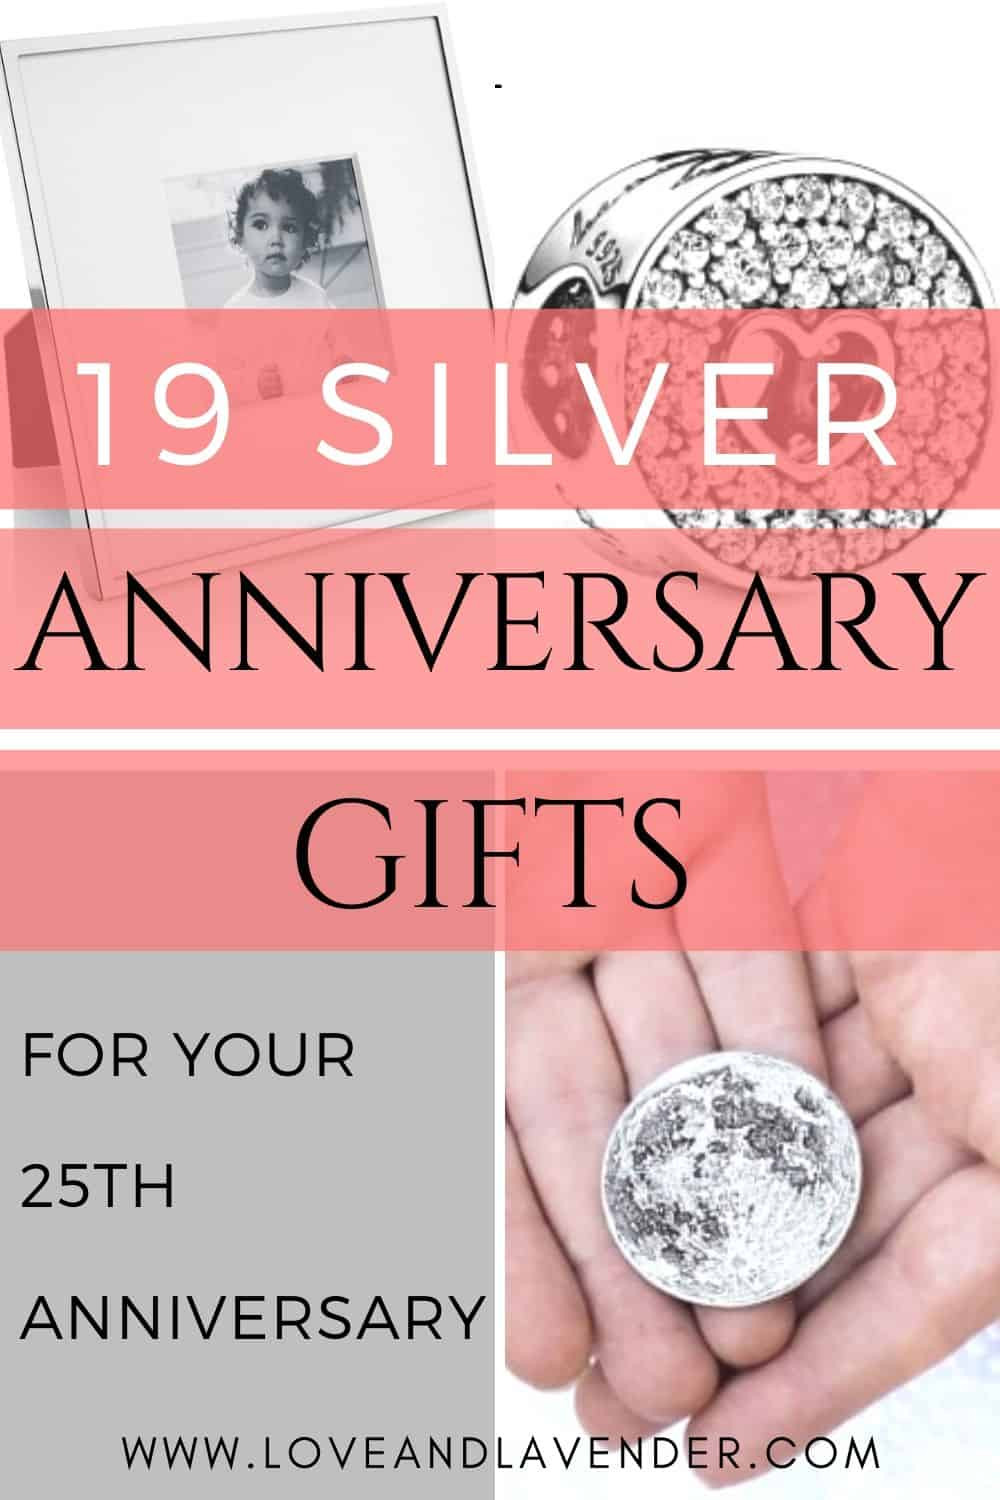 25Th Anniversary Gift Ideas For Him
 19 Stunning Silver Anniversary Gifts 25th Year for Him & Her